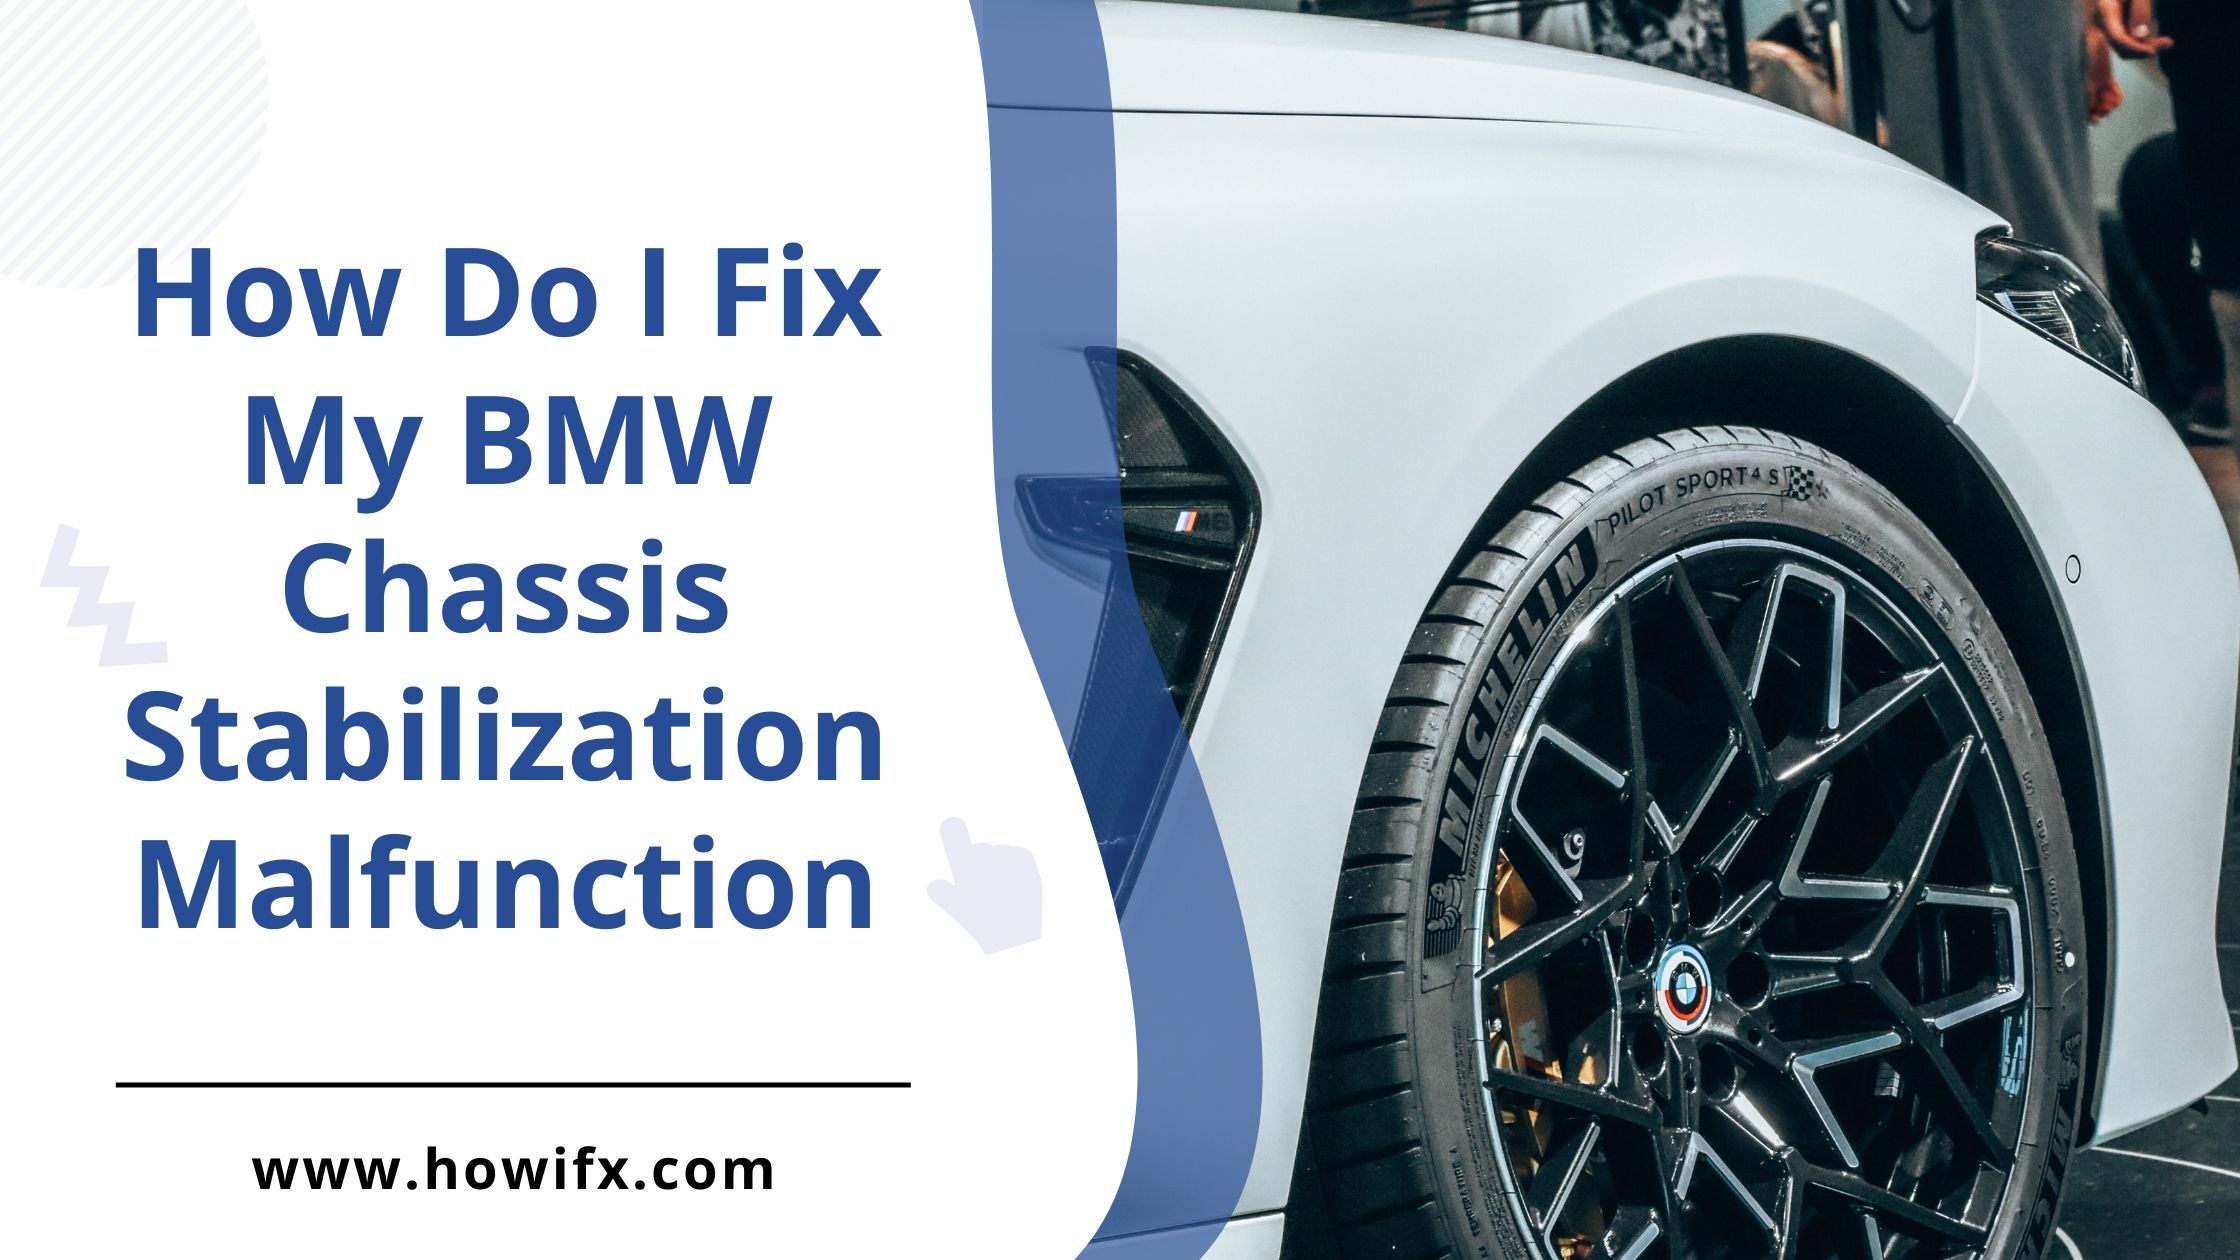 How Do I Fix My BMW Chassis Stabilization Malfunction